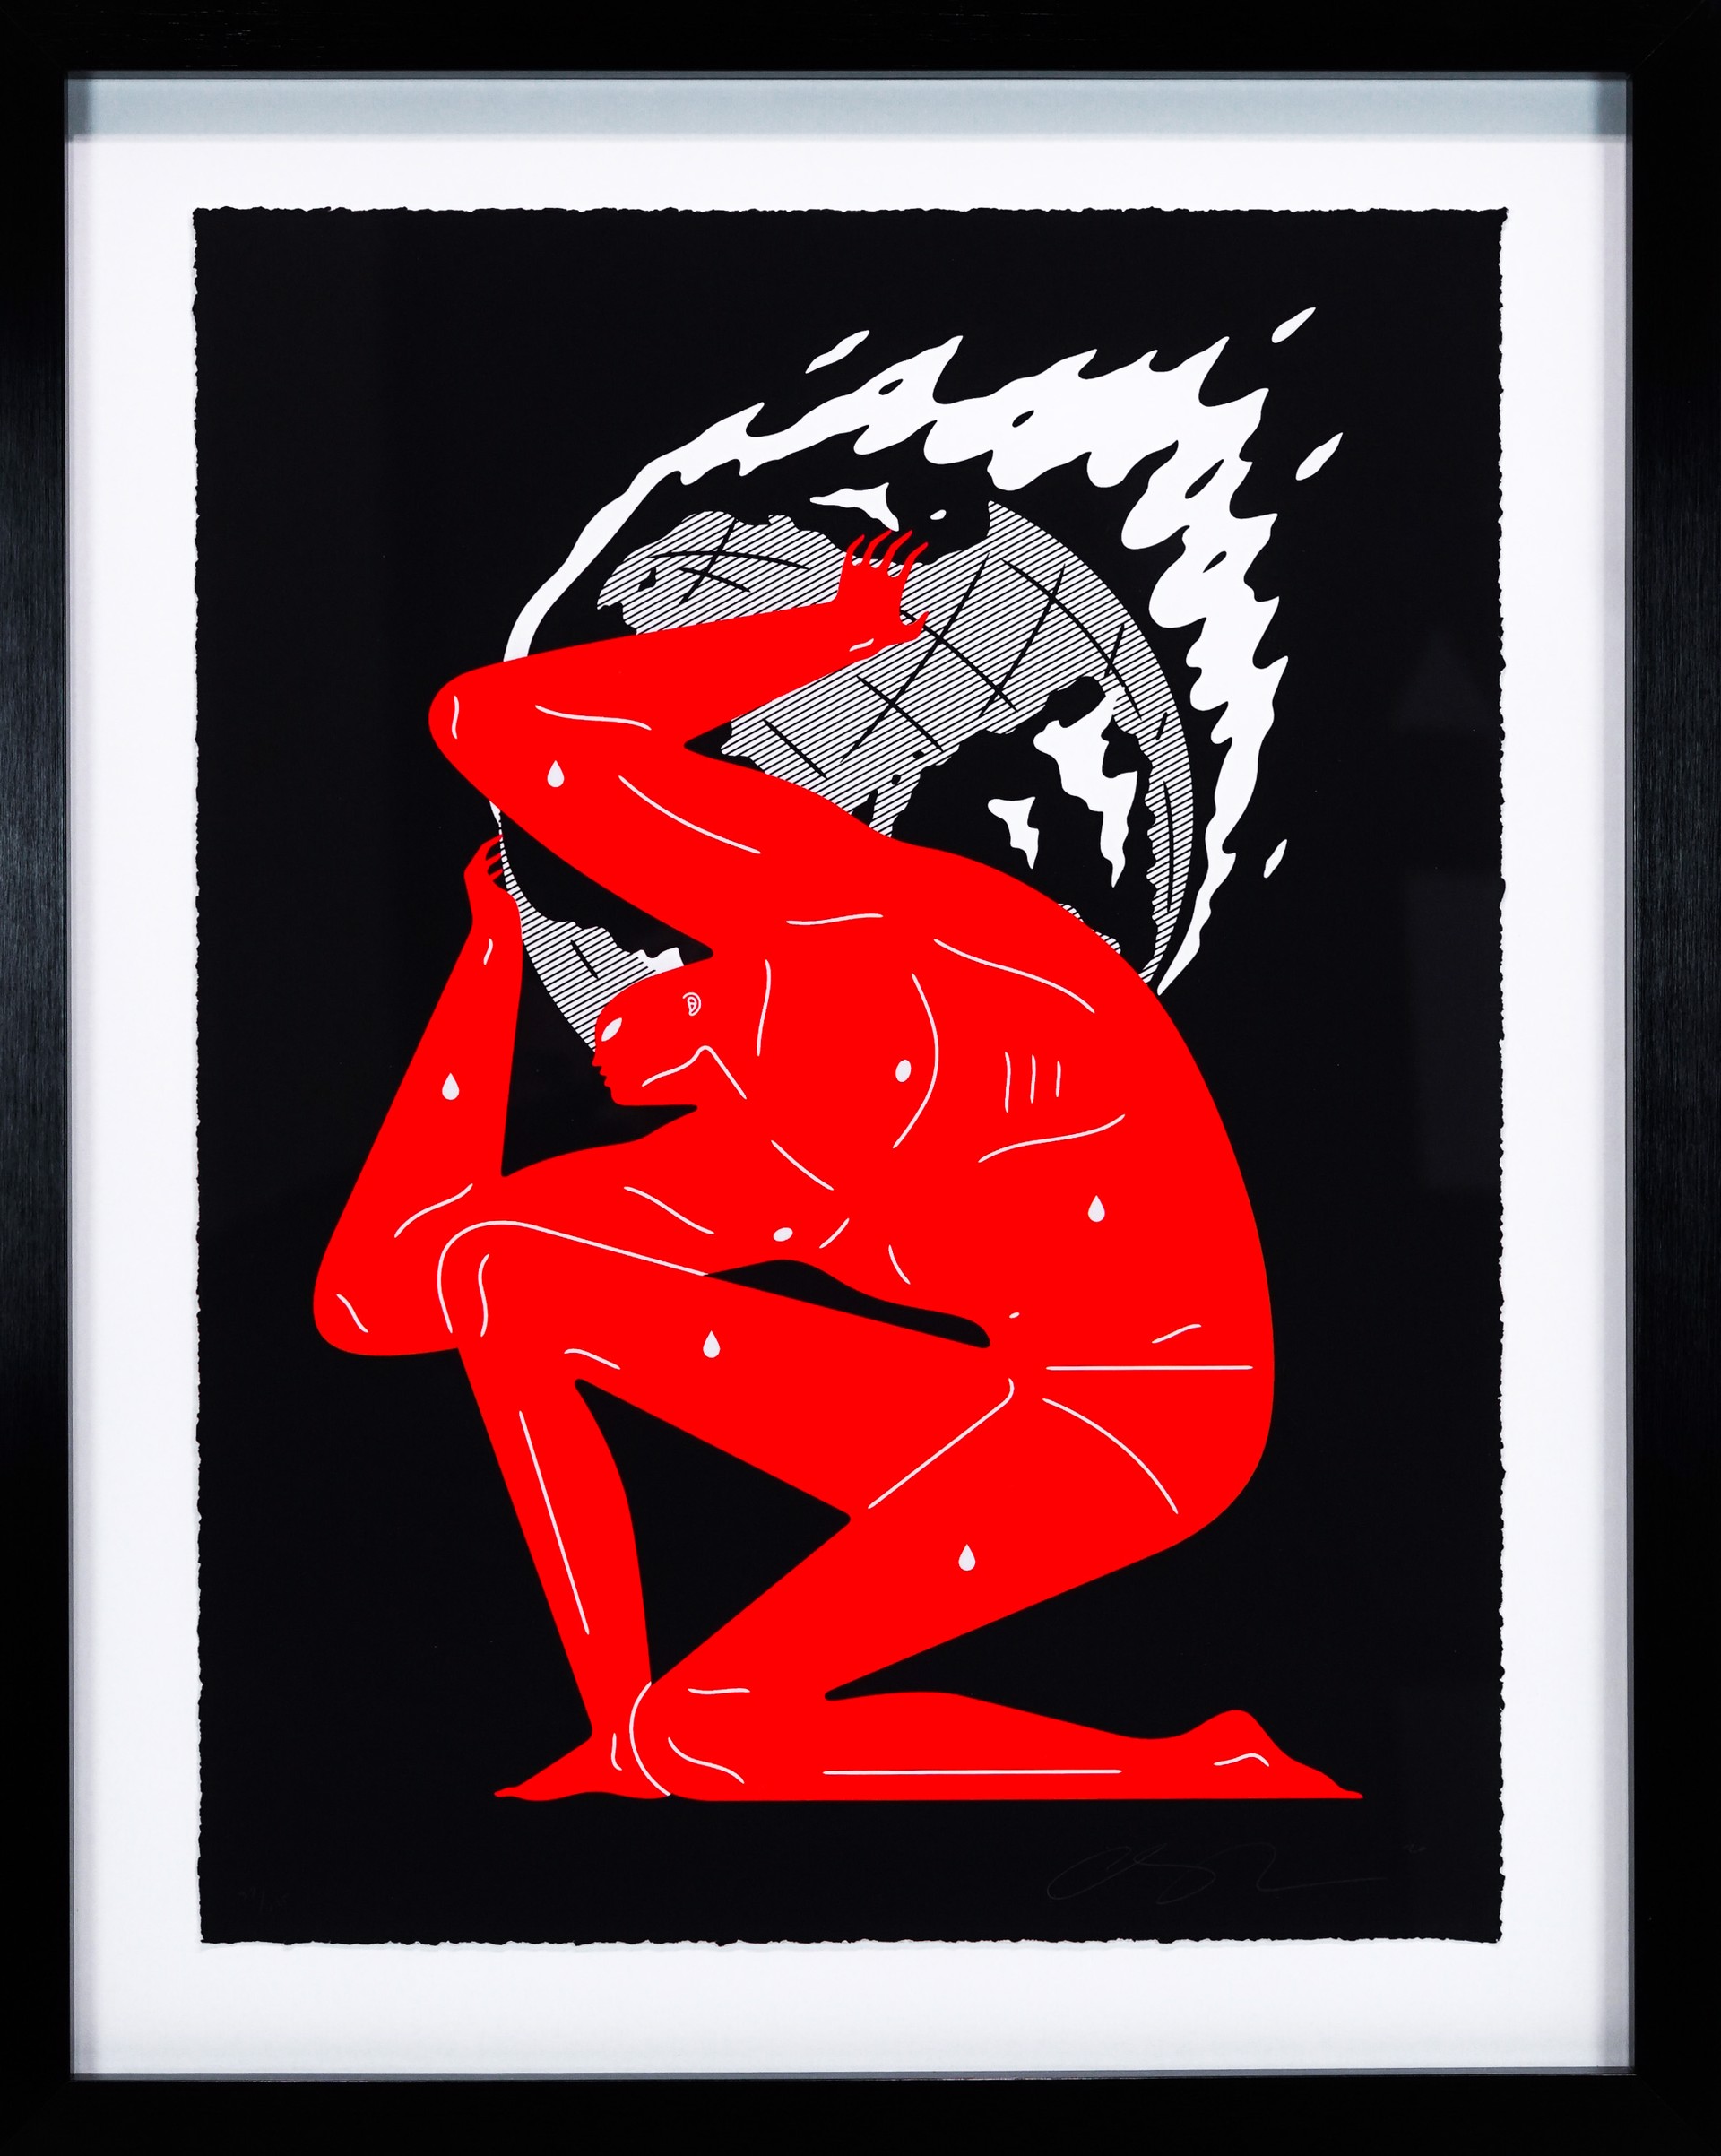 World on Fire (Black), (37/125) by Cleon Peterson